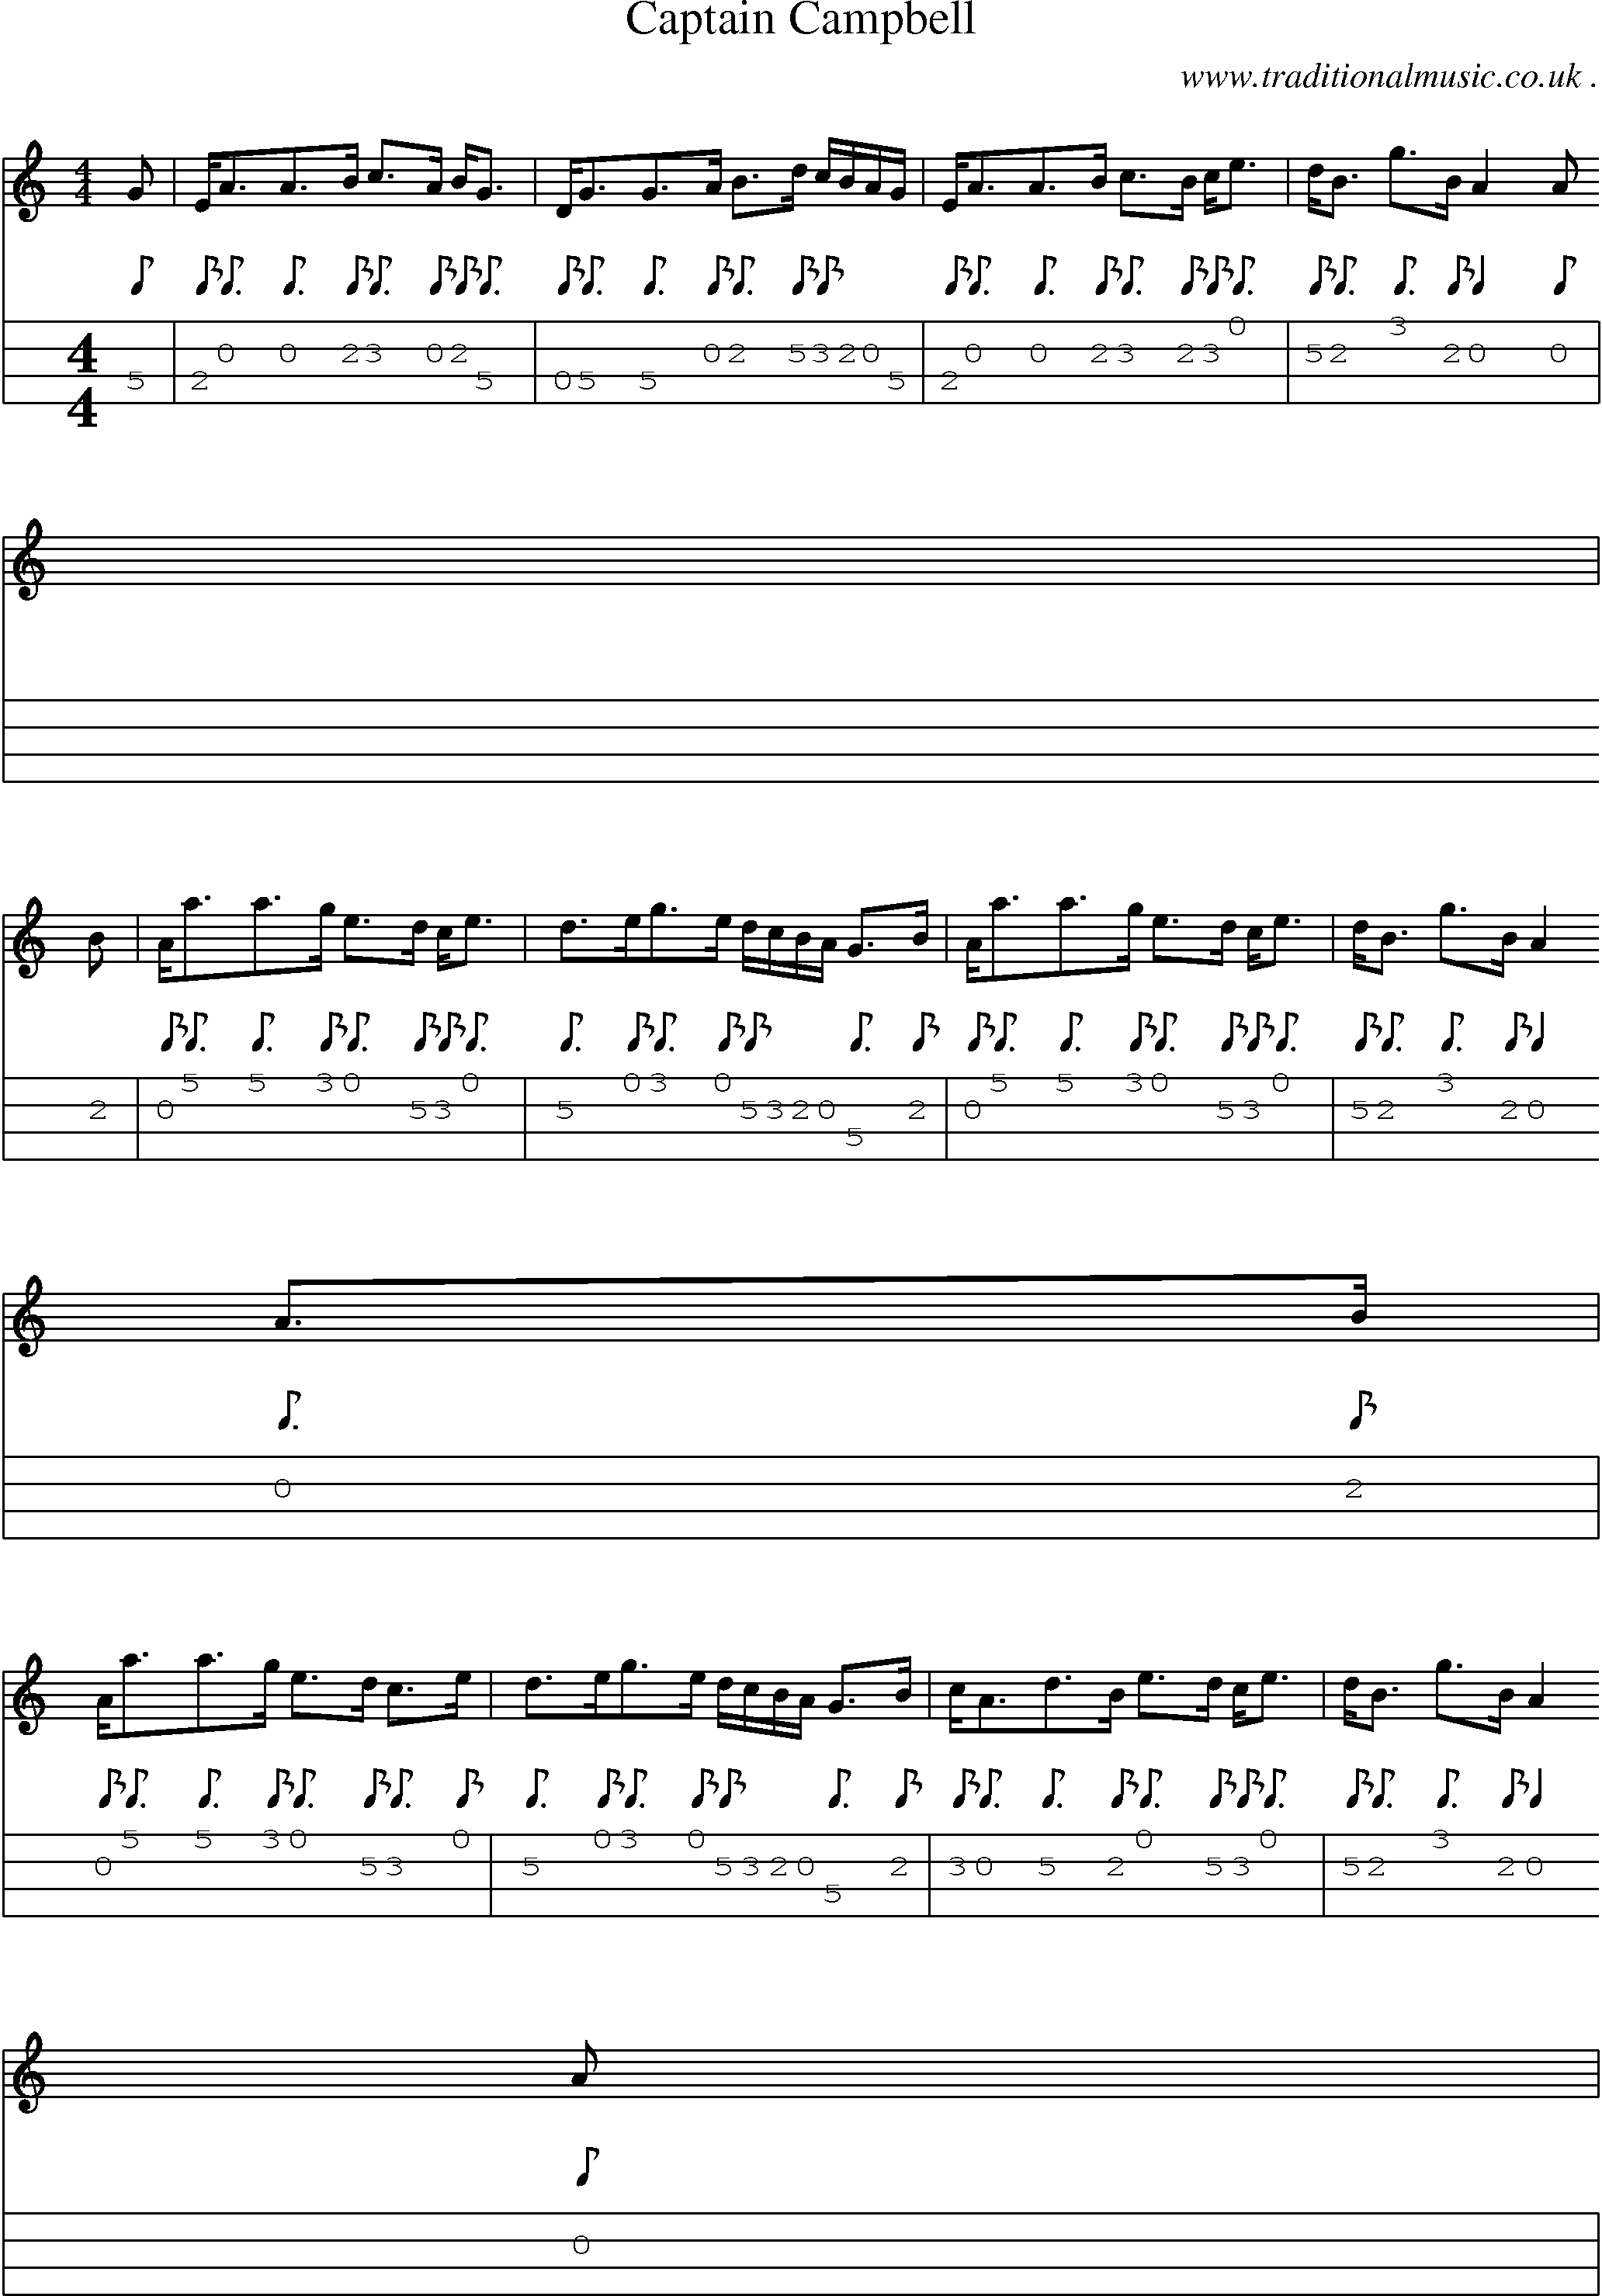 Sheet-music  score, Chords and Mandolin Tabs for Captain Campbell